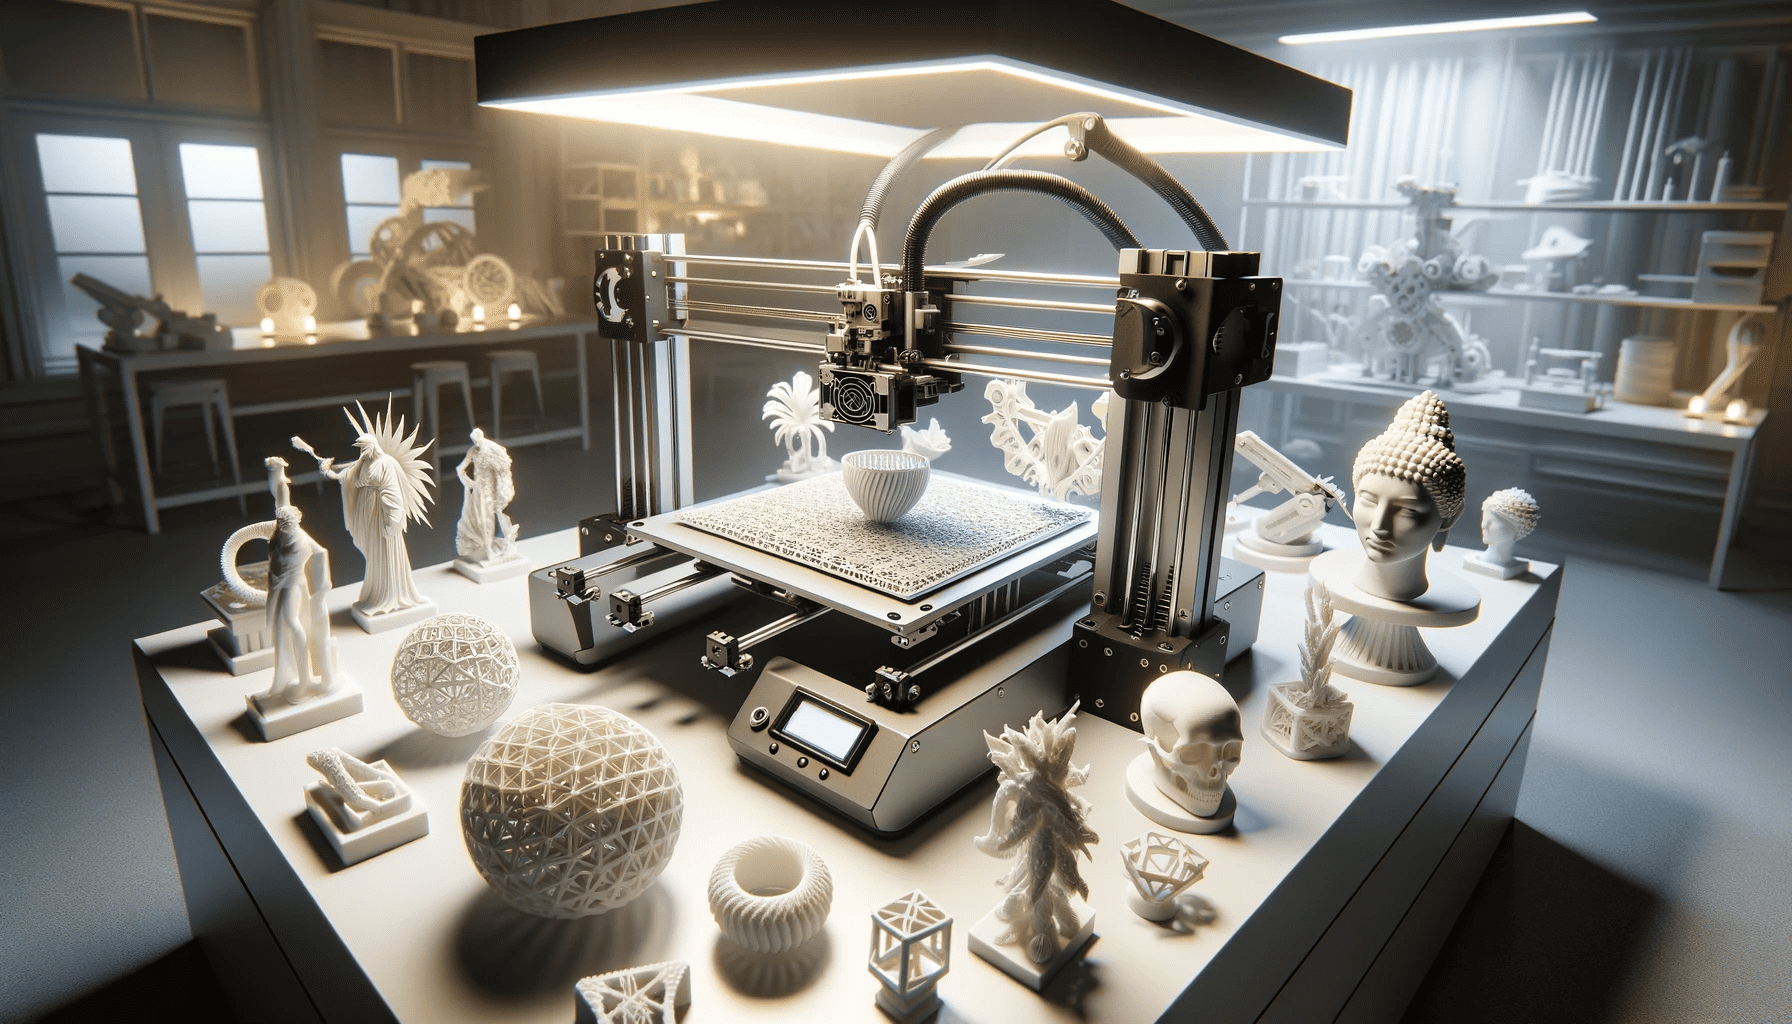 A detailed image of a 3D printer in action, set in a well-lit, crisp environment. The printer is successfully and flawlessly printing various objects,